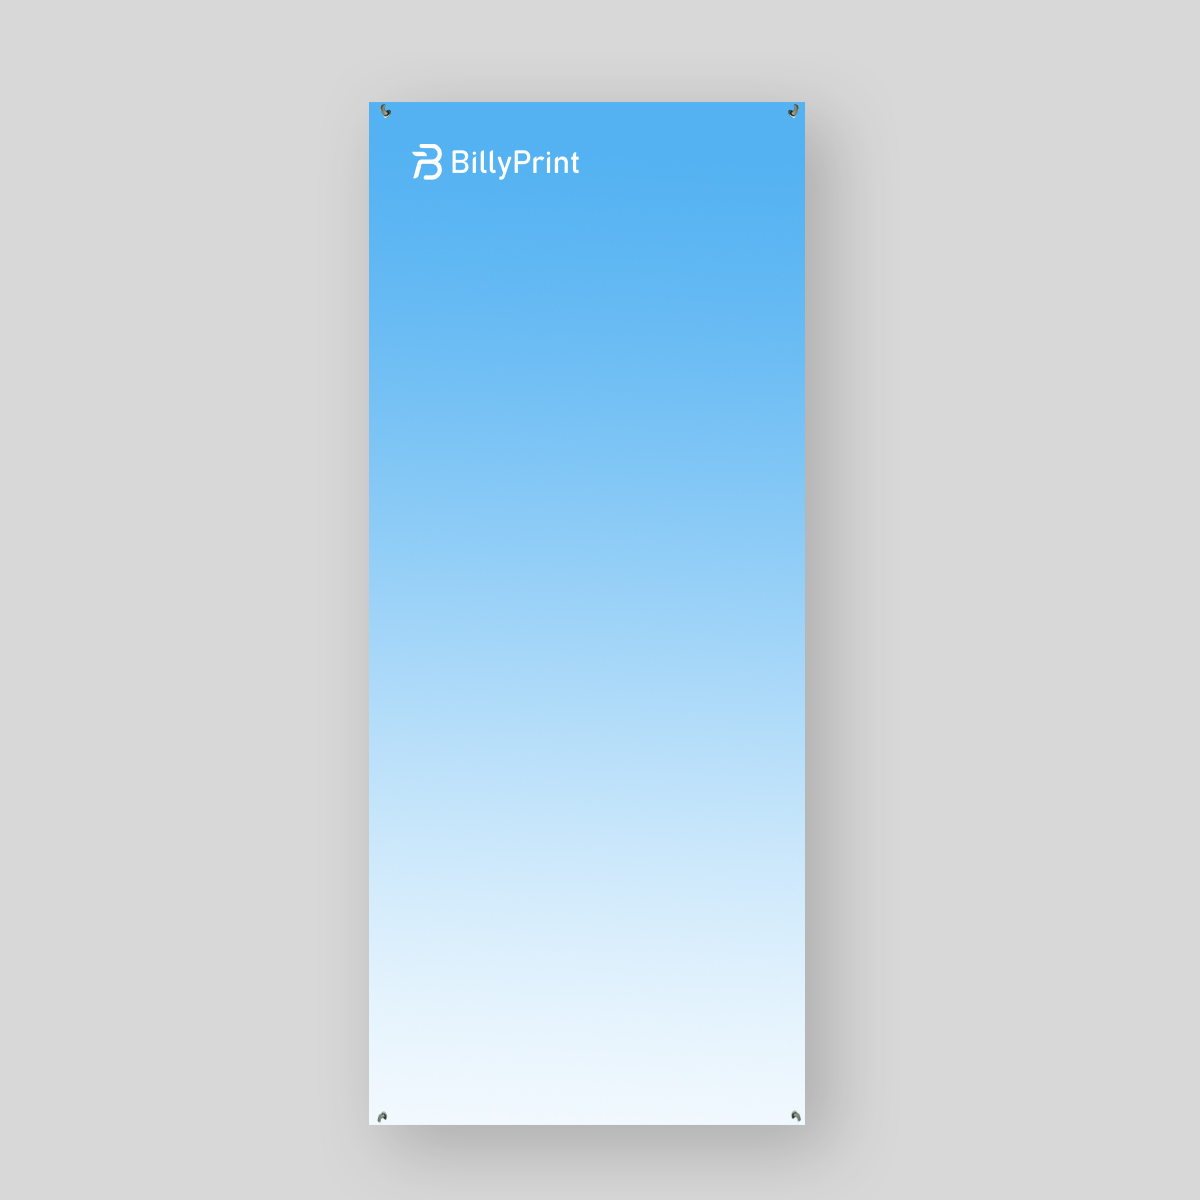 A vertical blue gradient banner with the logo "BillyPrint" at the top, displayed on an adjustable X banner stand.